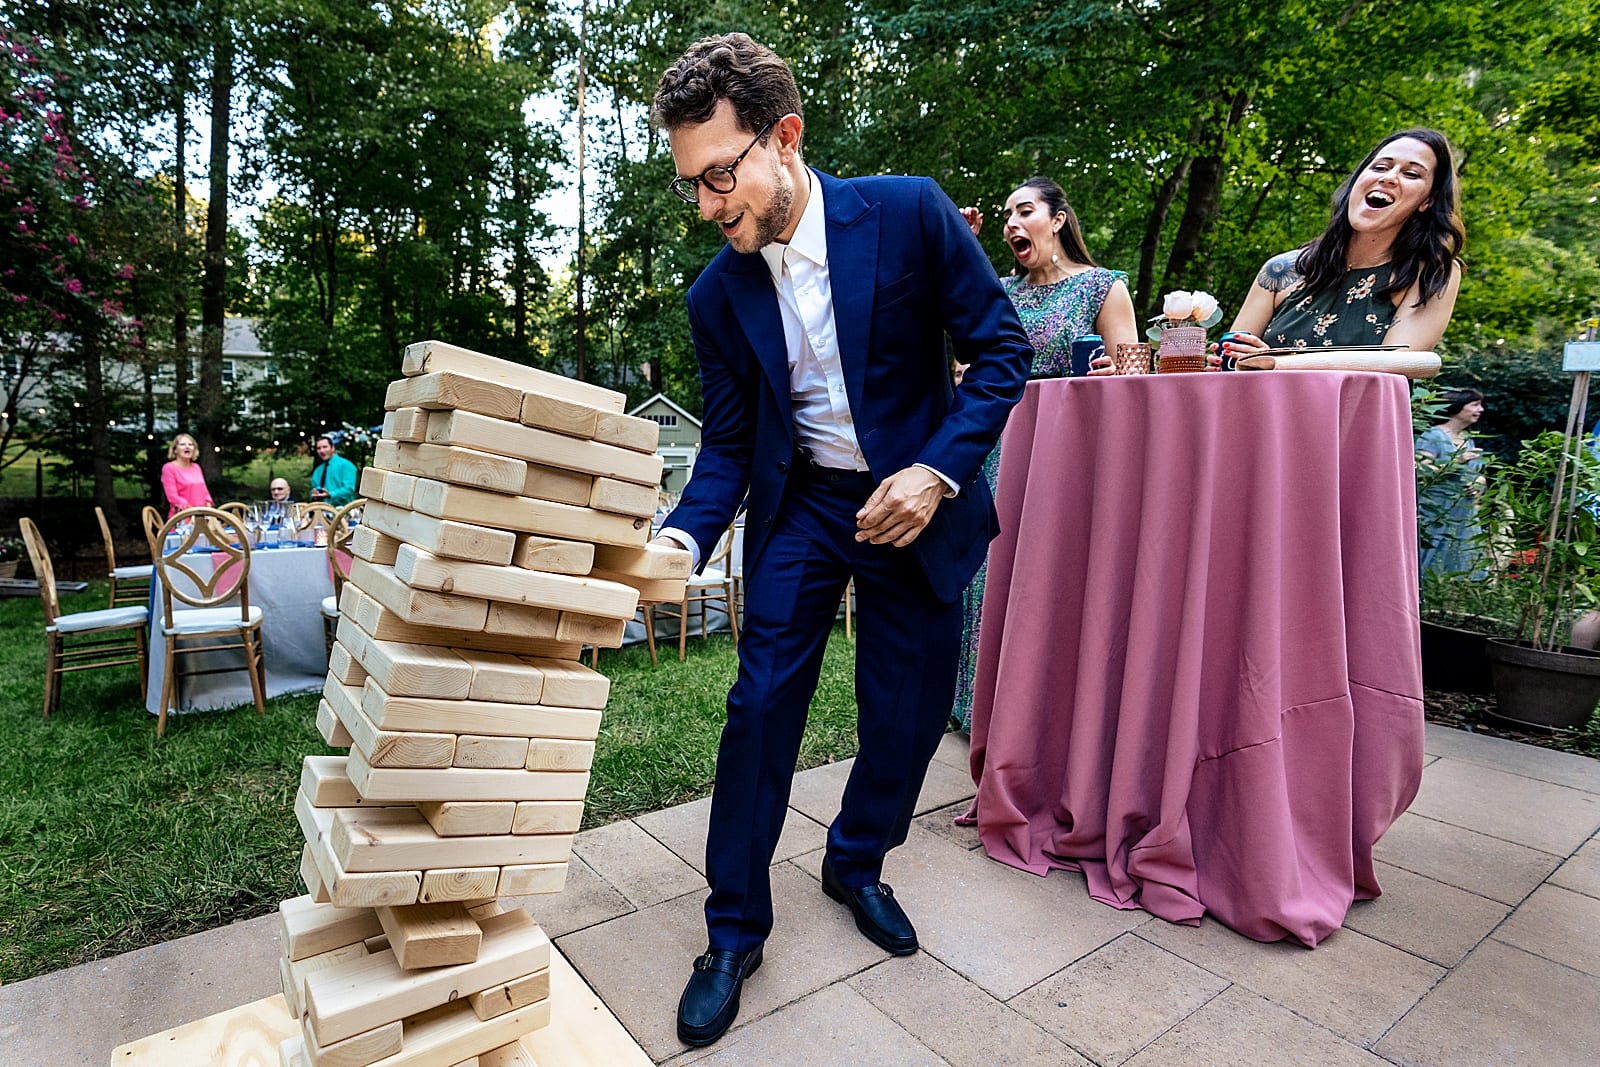 Yard games are a must for a DIY wedding in the backyard